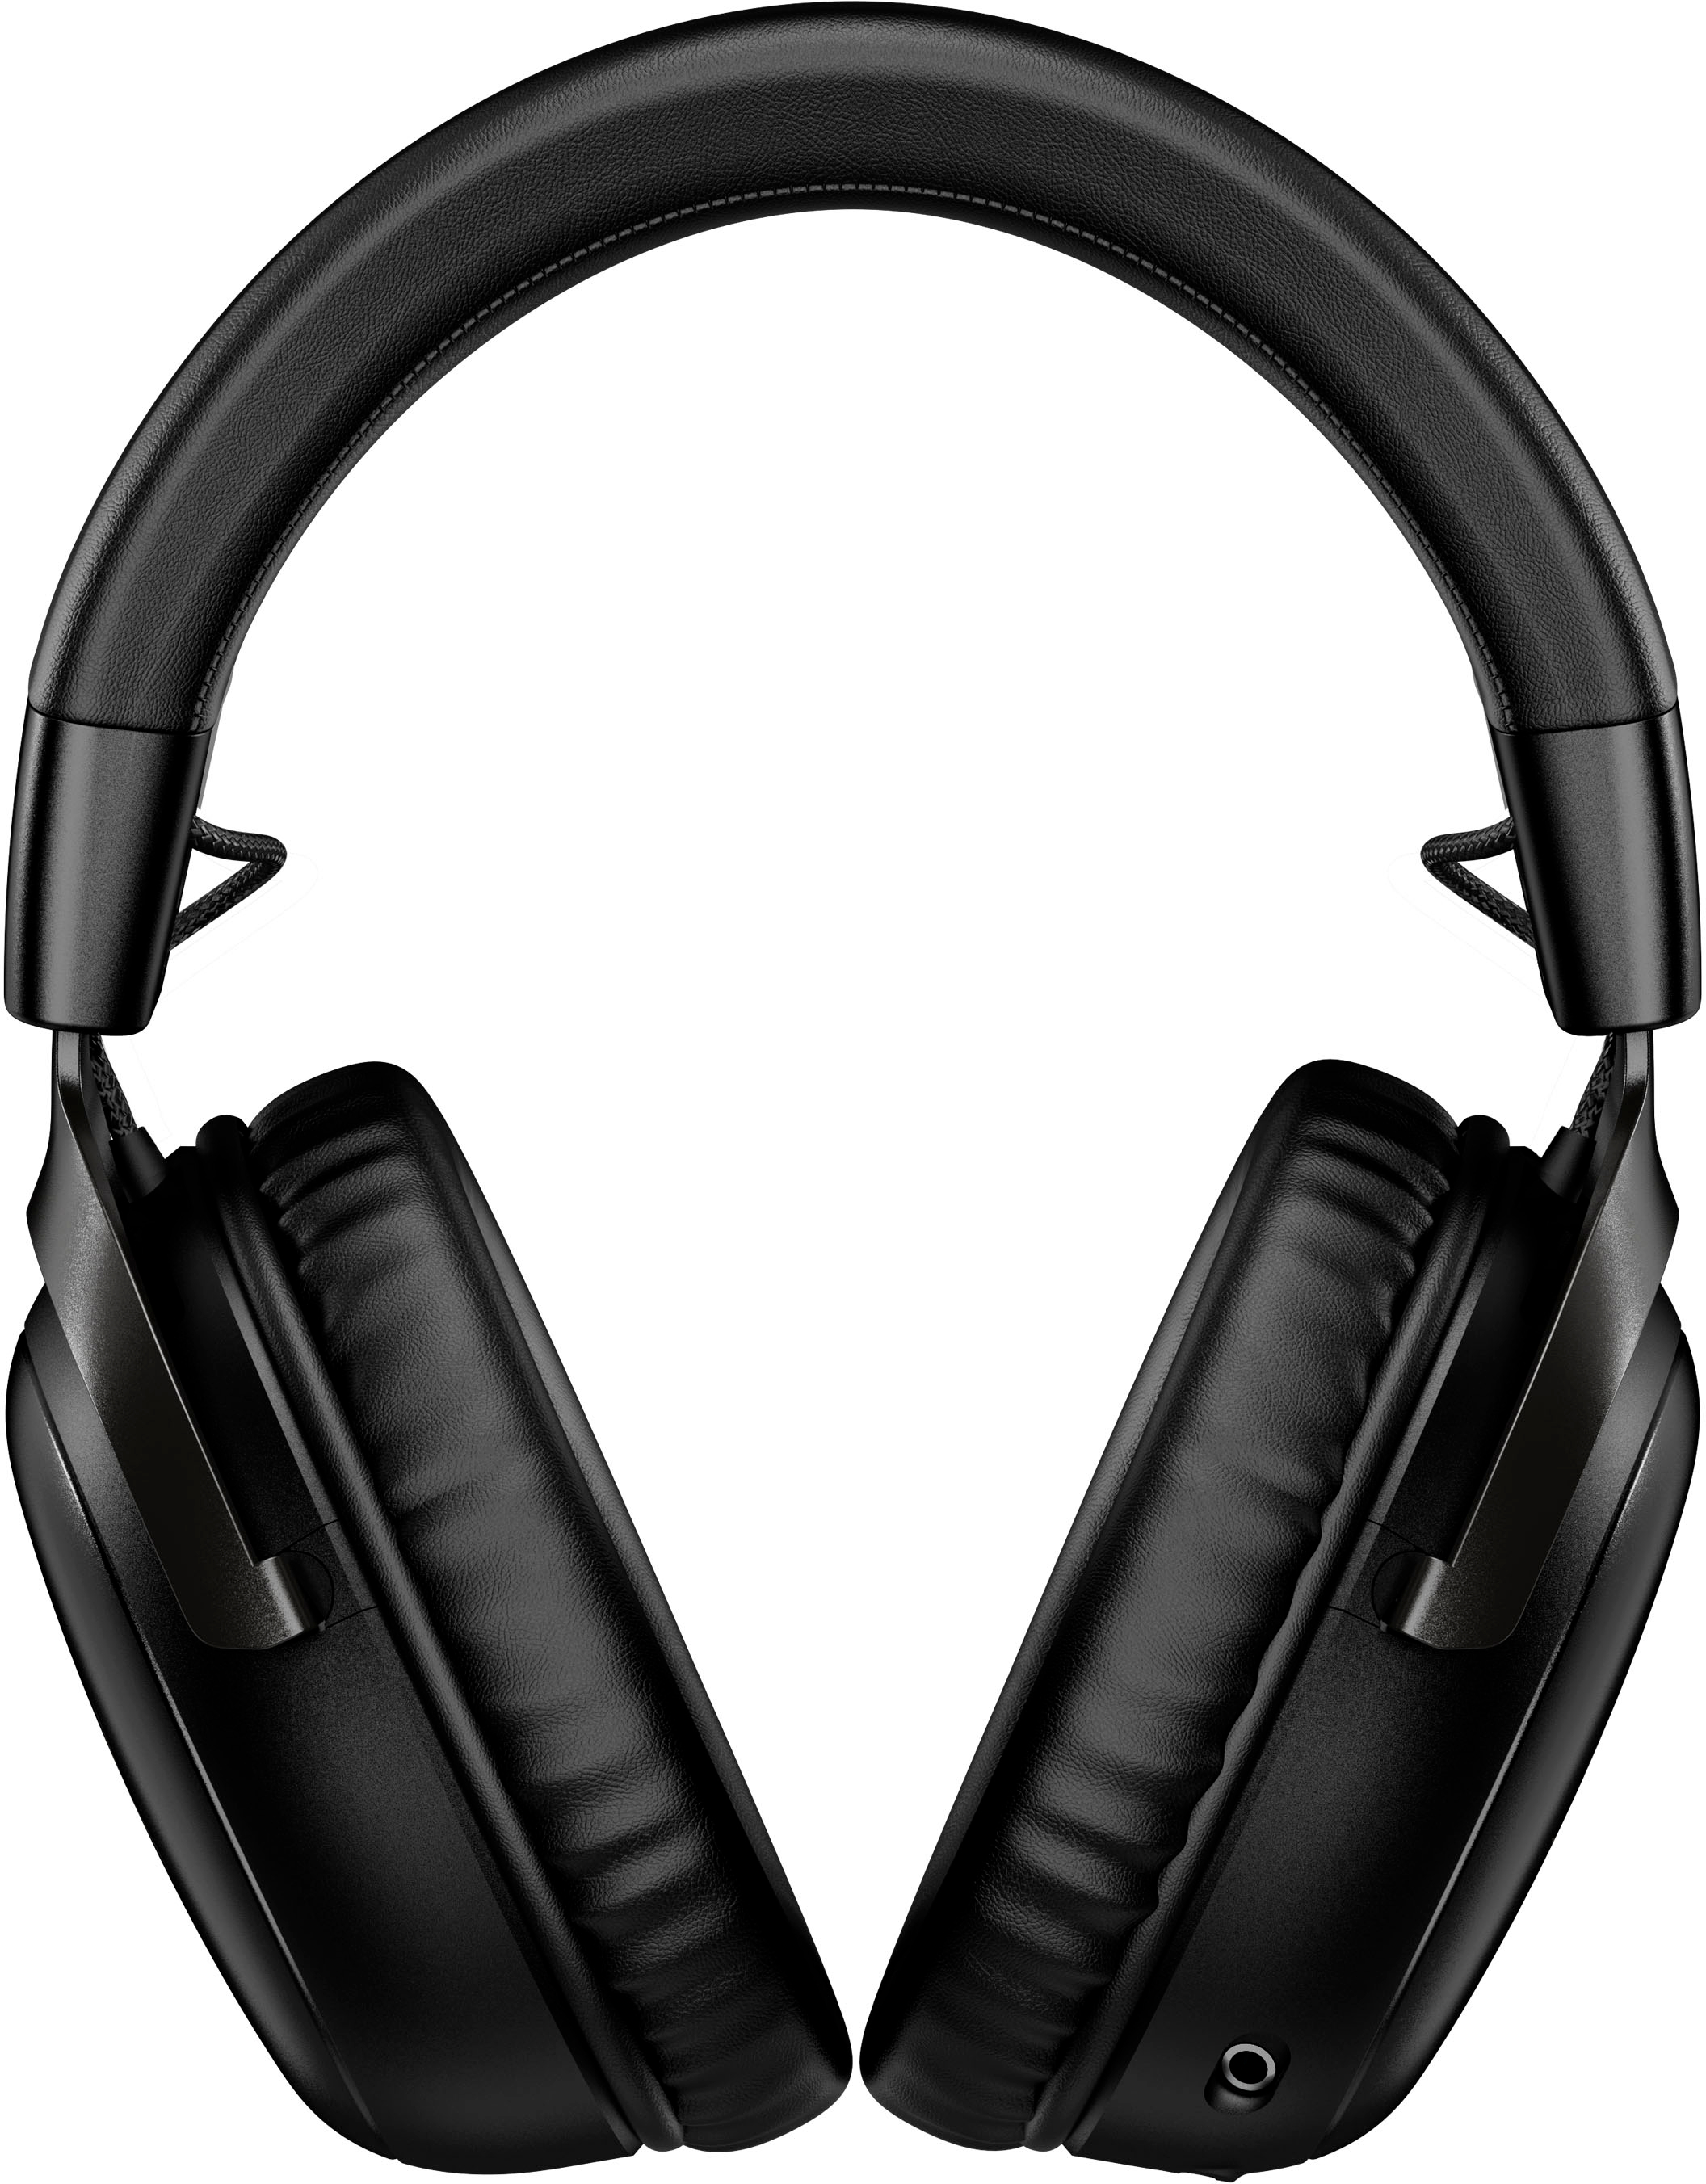 HyperX Cloud 3 Wireless Gaming Headset – XtremeSolution